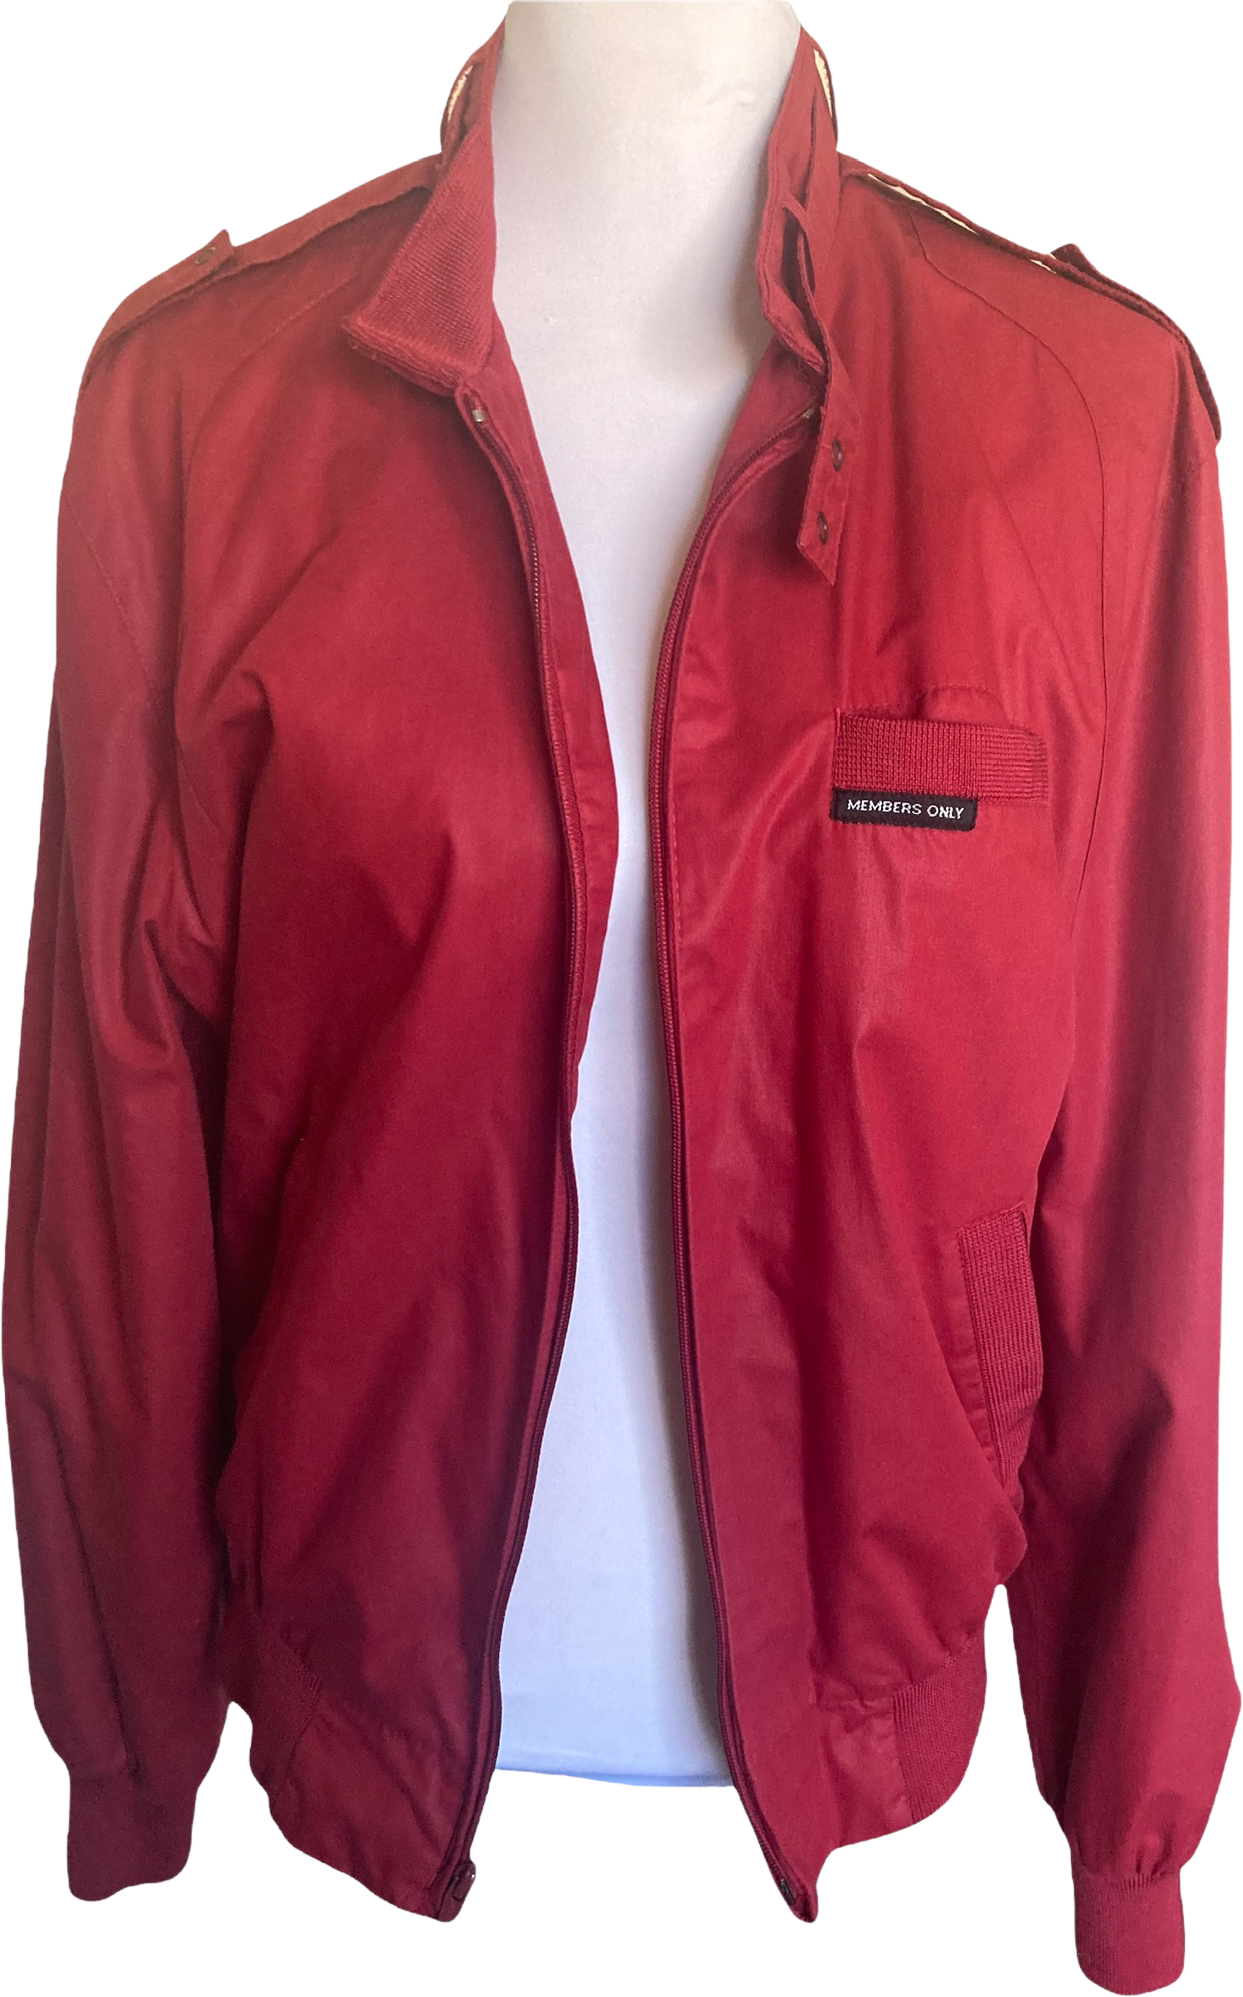 Members Only Vintage 80s Men's Jackets for sale in Stanton